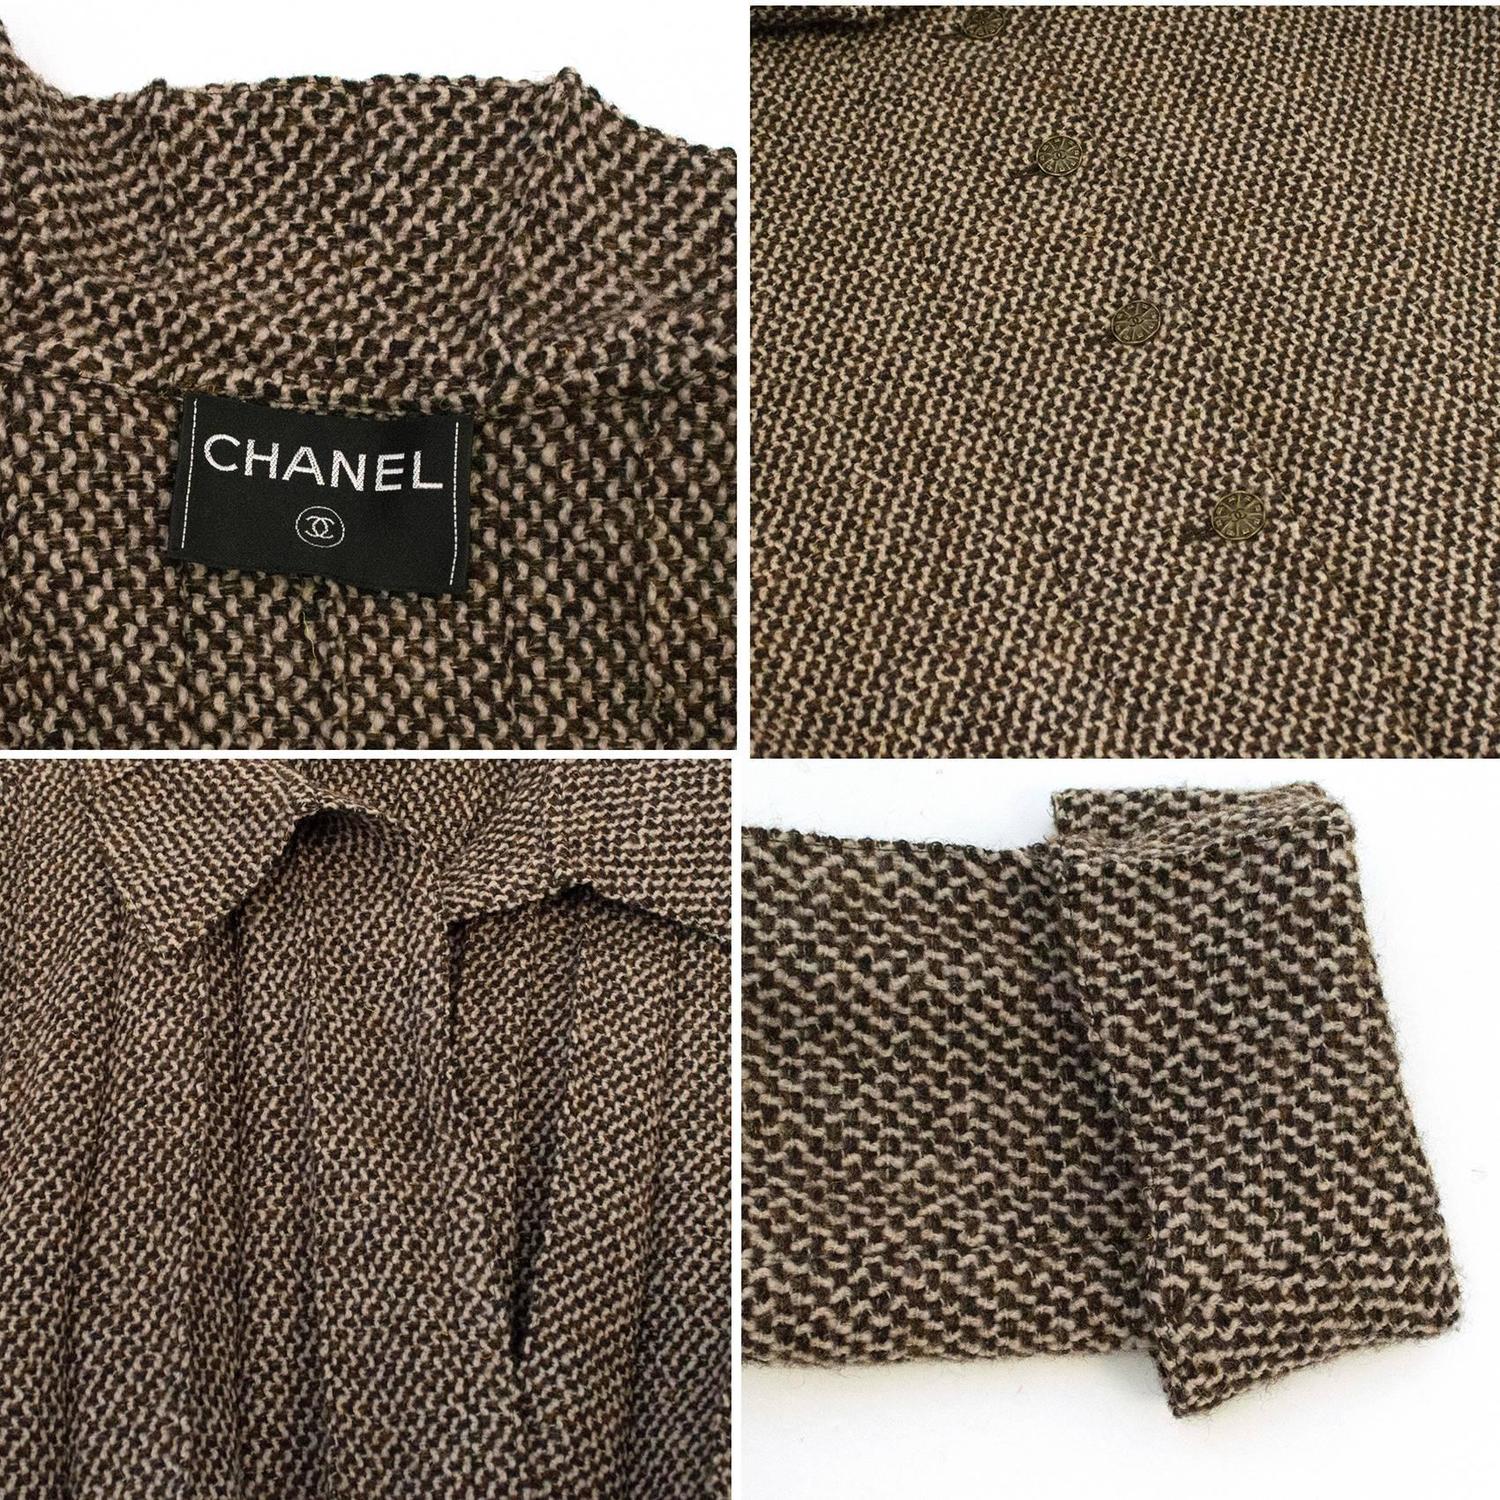 Chanel Tweed Skirt Wool Suit For Sale at 1stdibs